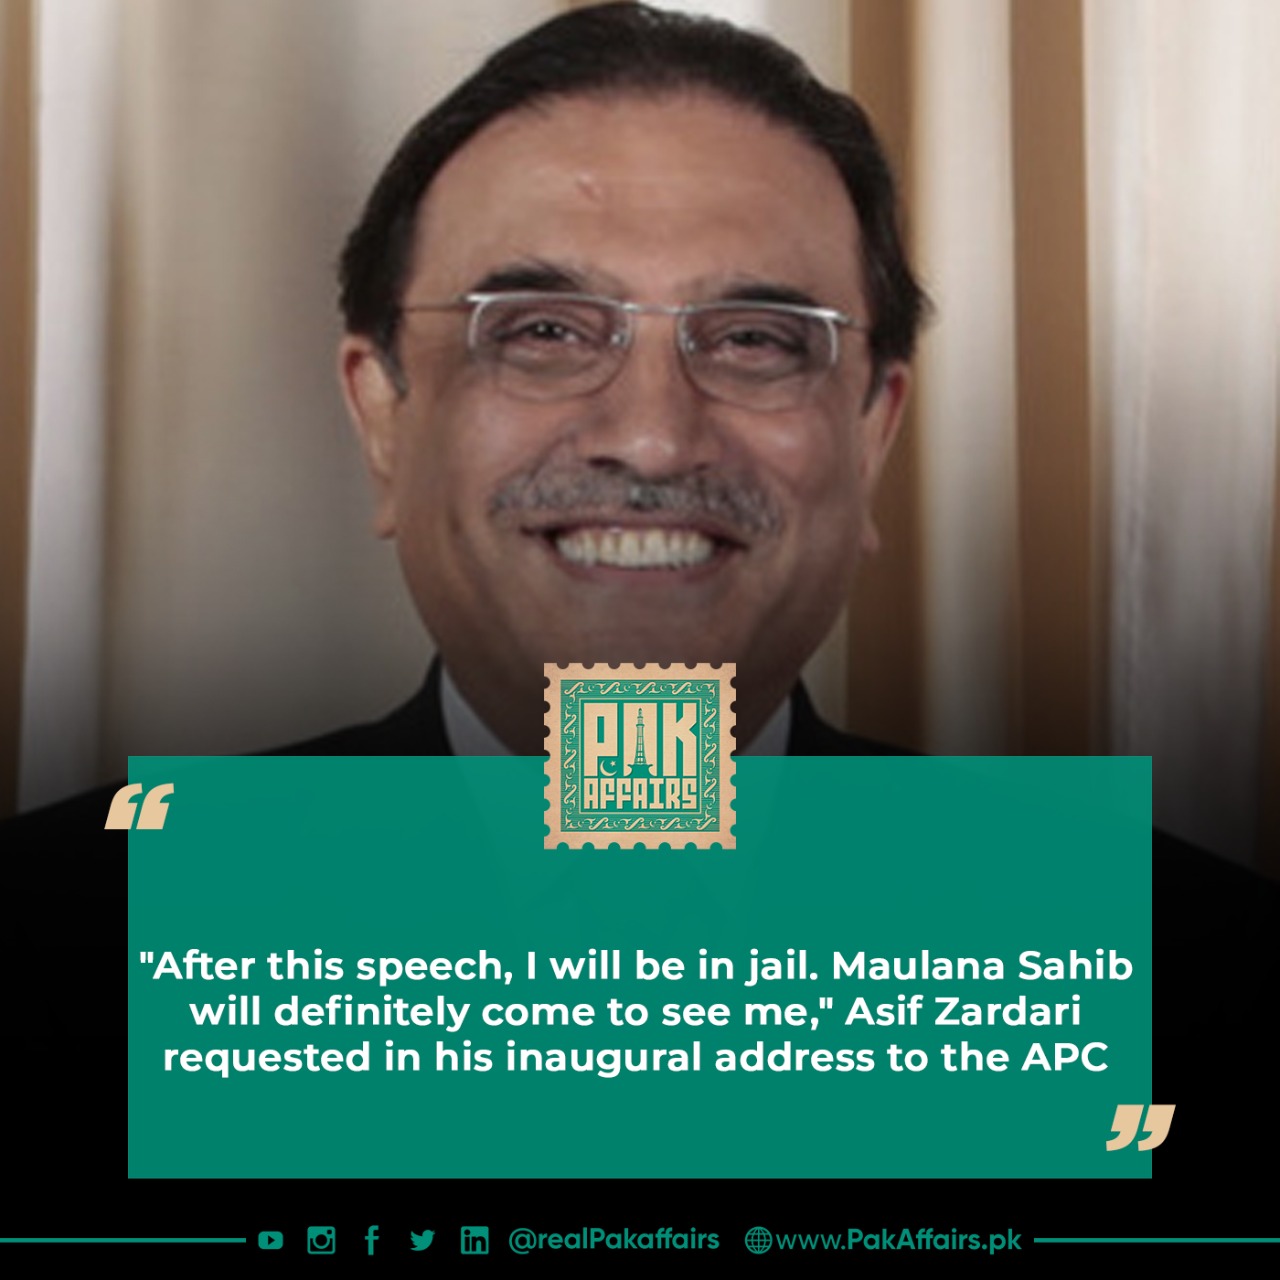 "After this speech, I will be in jail. Maulana Sahib will definitely come to see me," Asif Zardari requested in his inaugural address to the APC